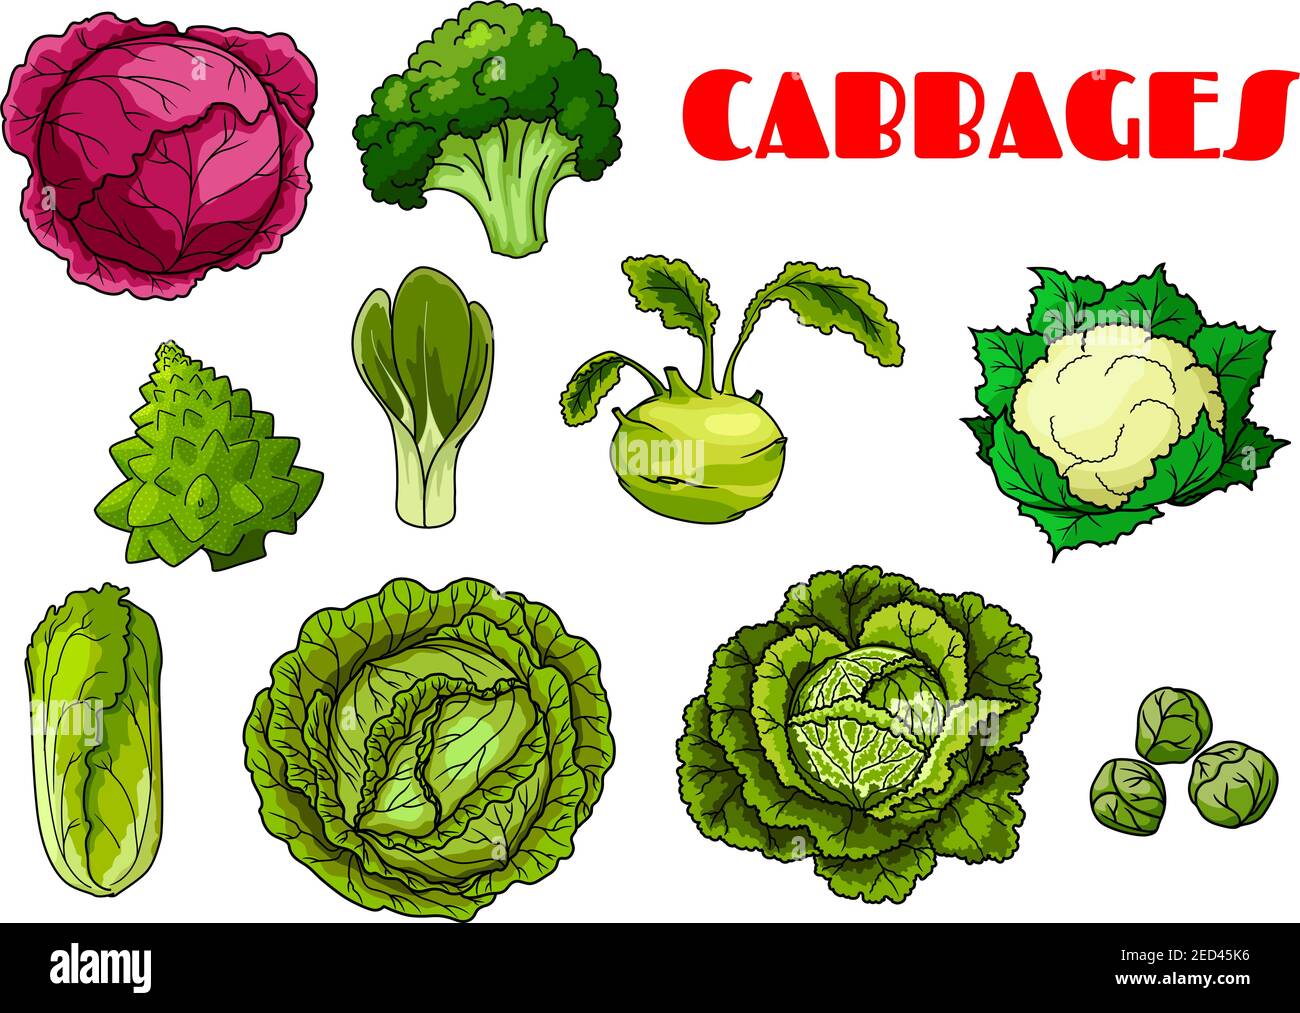 Vegetable cabbages set. Red cabbage, broccoli, cauliflower and chinese cabbage, brussels sprout, kohlrabi and napa, collard greens and savoy, kale, ka Stock Vector